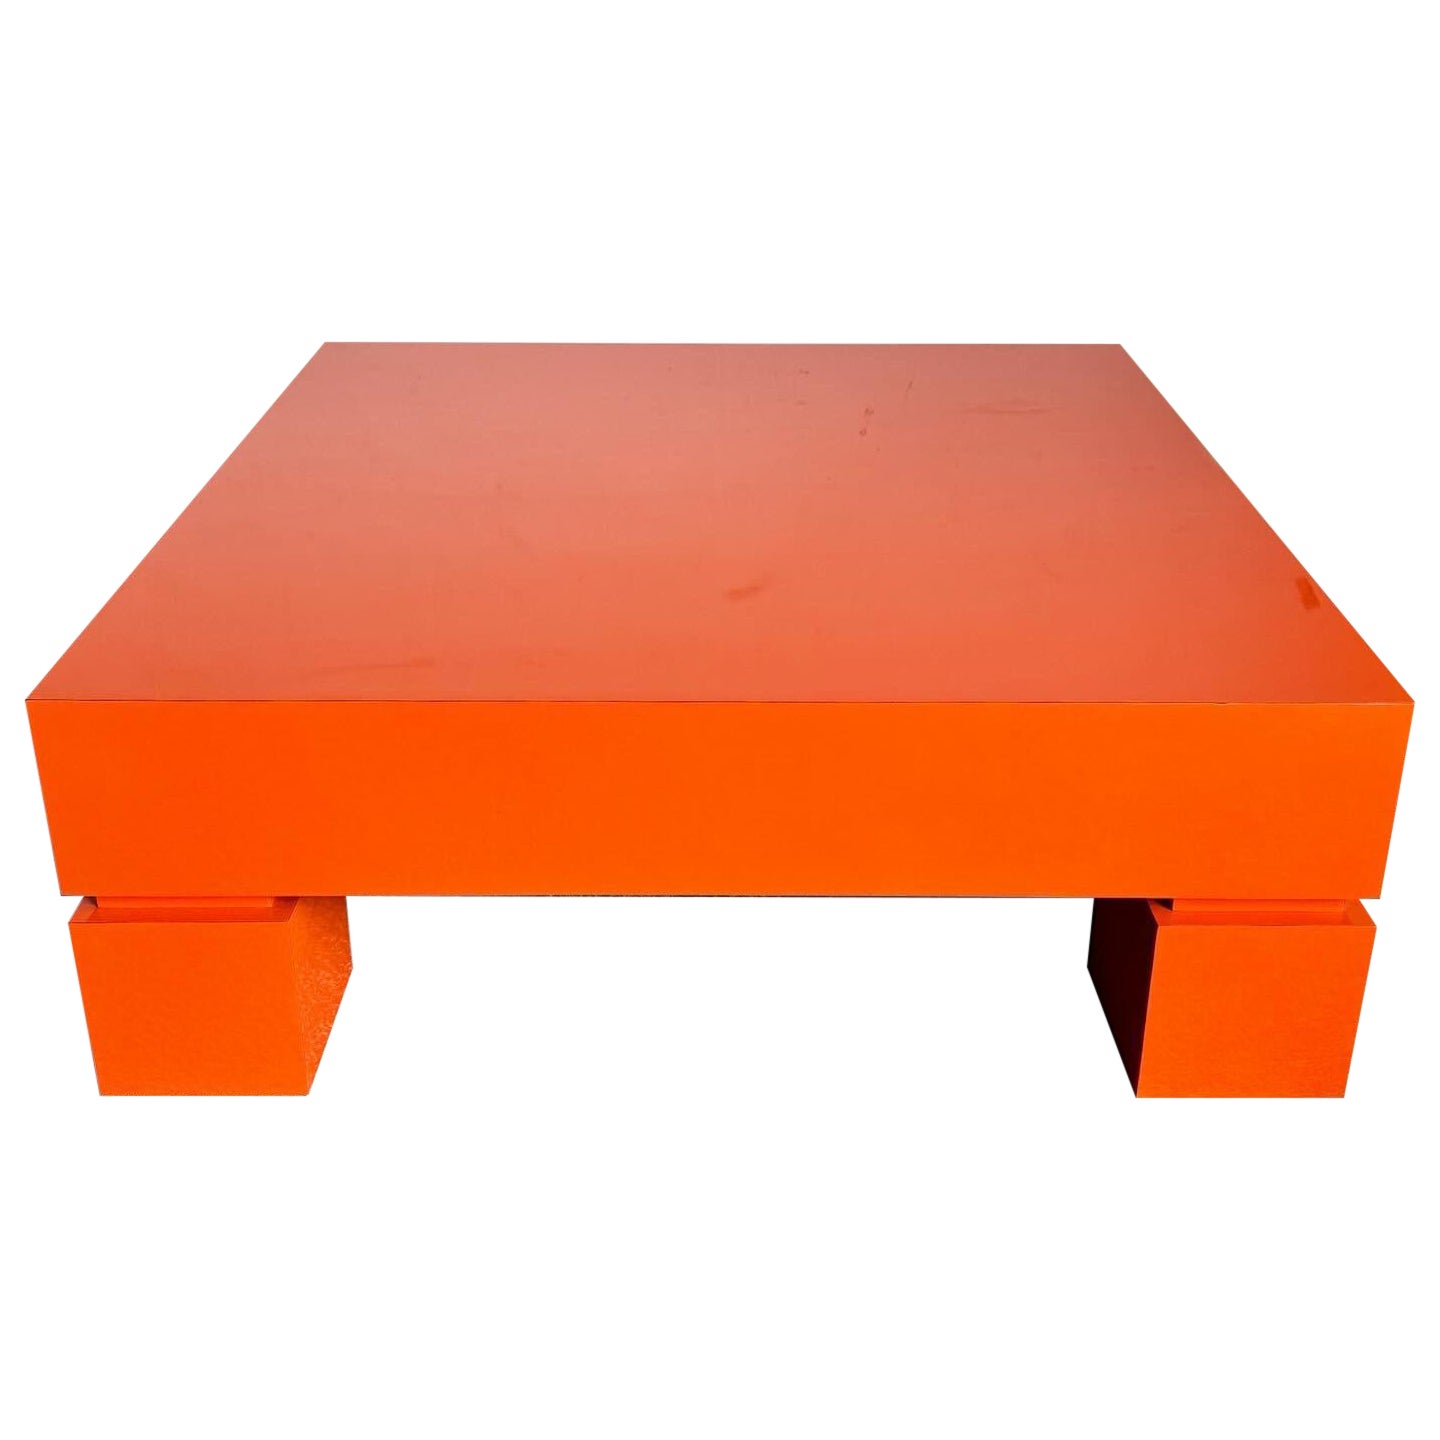 Postmodern Orange Lacquer Laminate Cubic Coffee Table